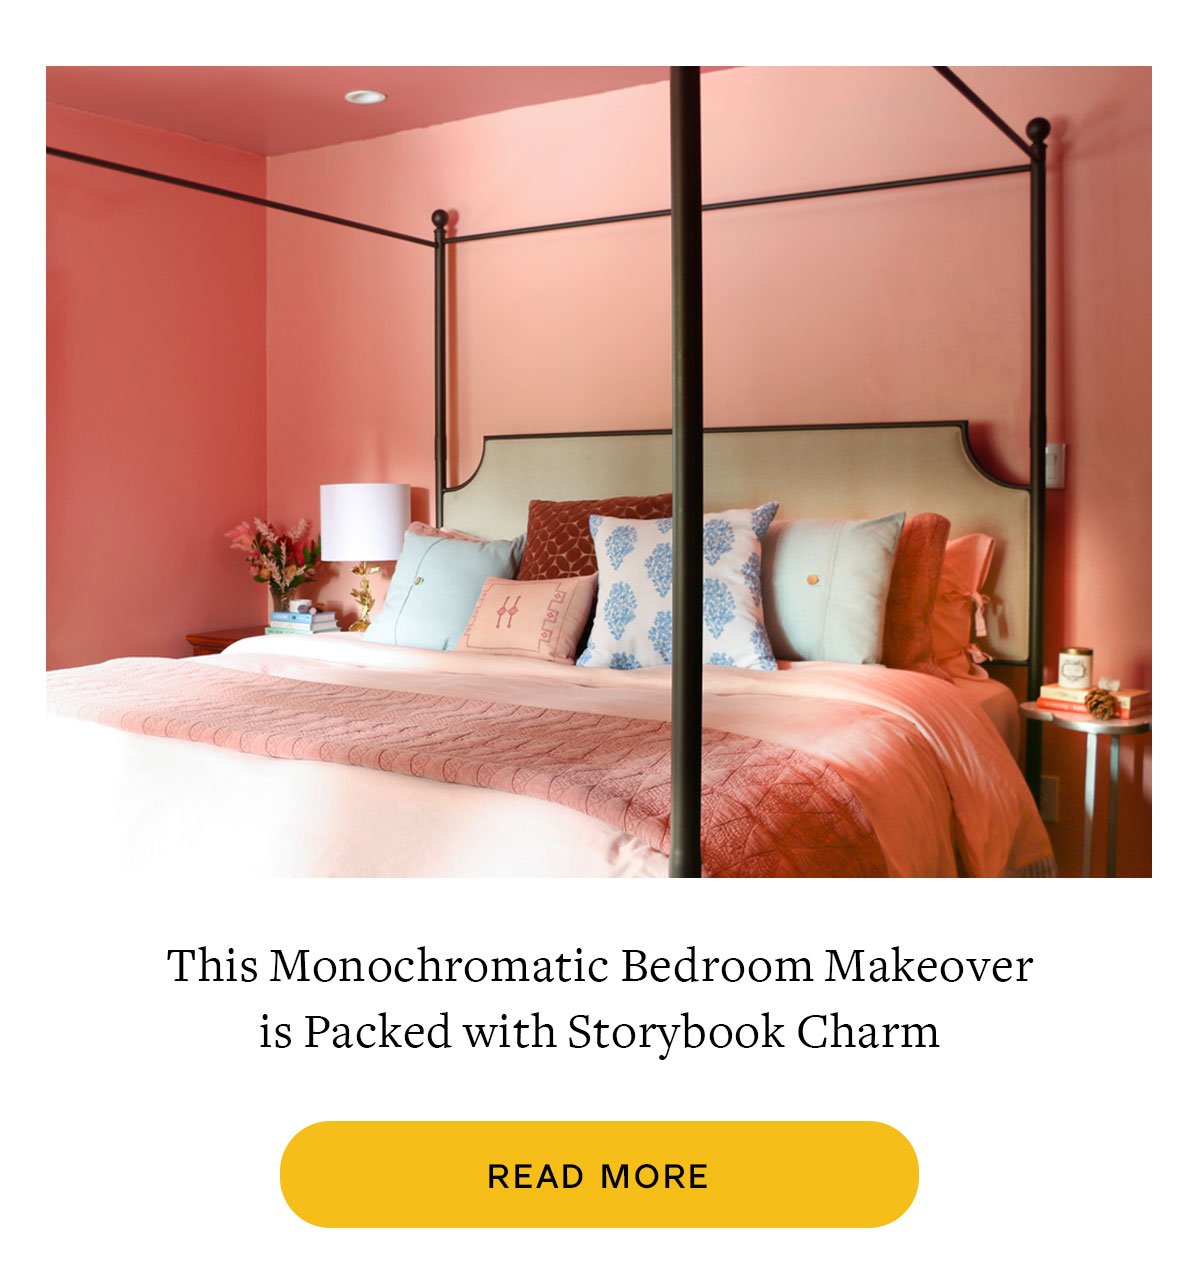 Blog: This Monochromatic Bedroom Makeover is Packed with Storybook Charm